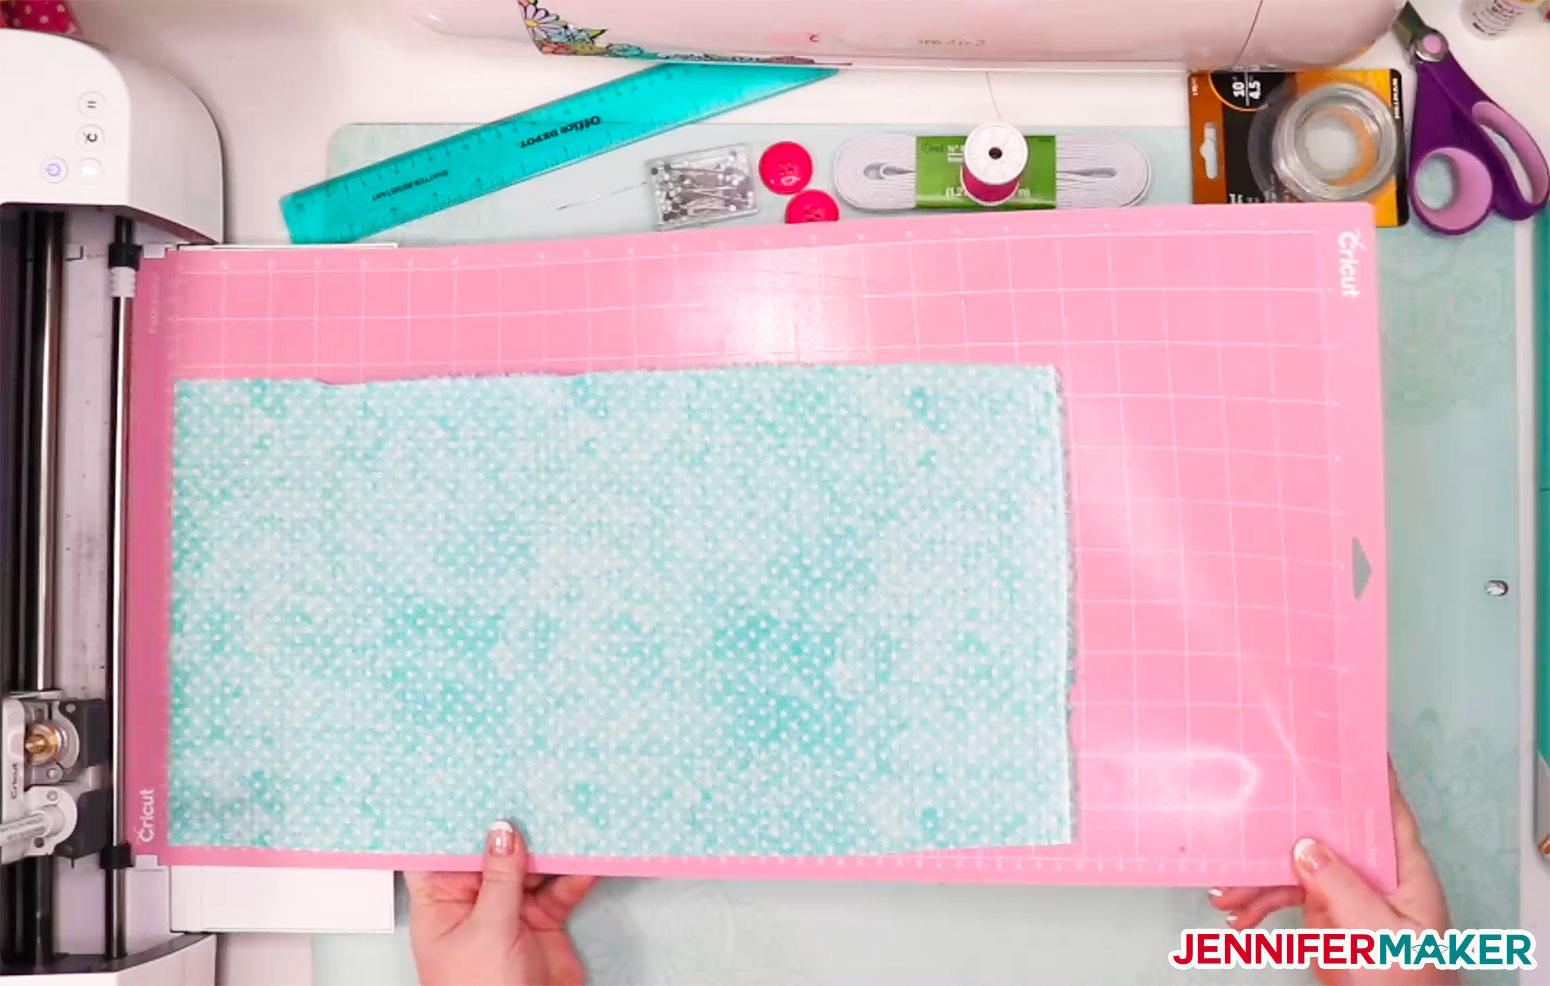 Loading fabric on a pink FabricGrip mat in to a Cricut Maker to make DIY headbands with buttons for masks